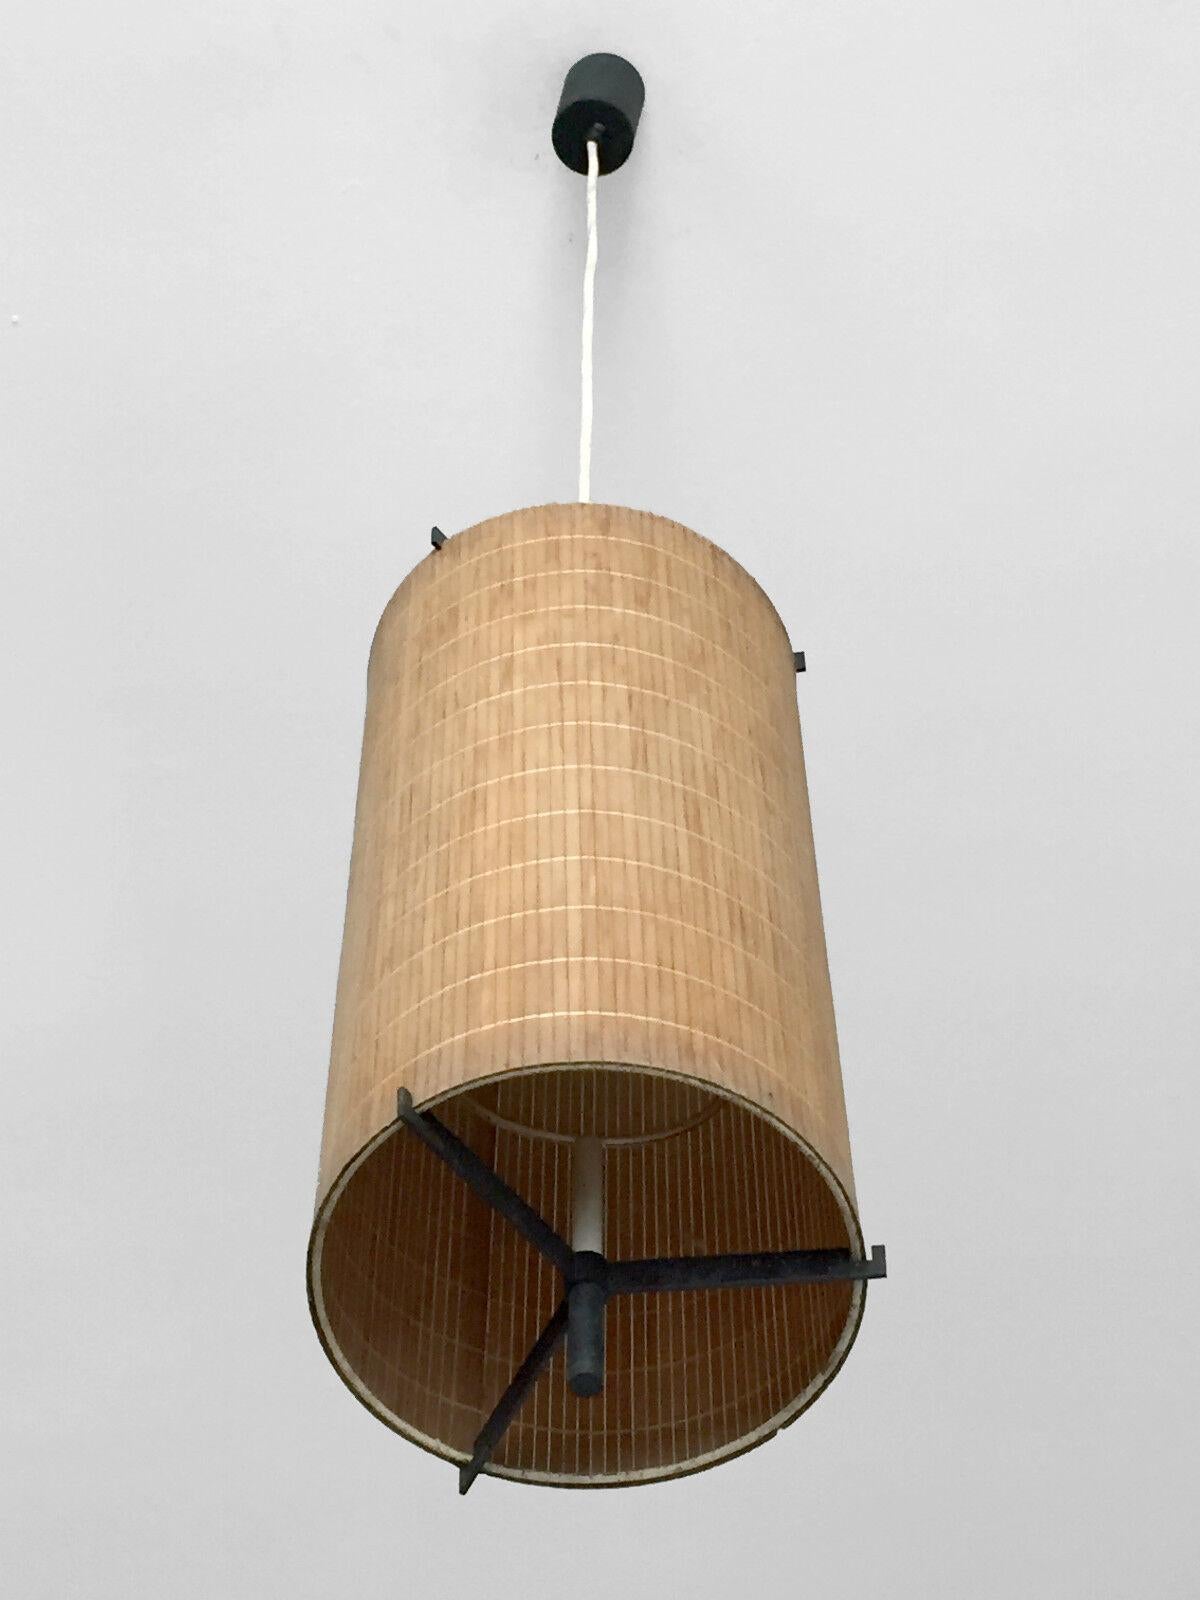 A MID-CENTURY-MODERN MODERNIST Ceiling Fixture LAMP by MAISON ARLUS, France 1950 For Sale 3